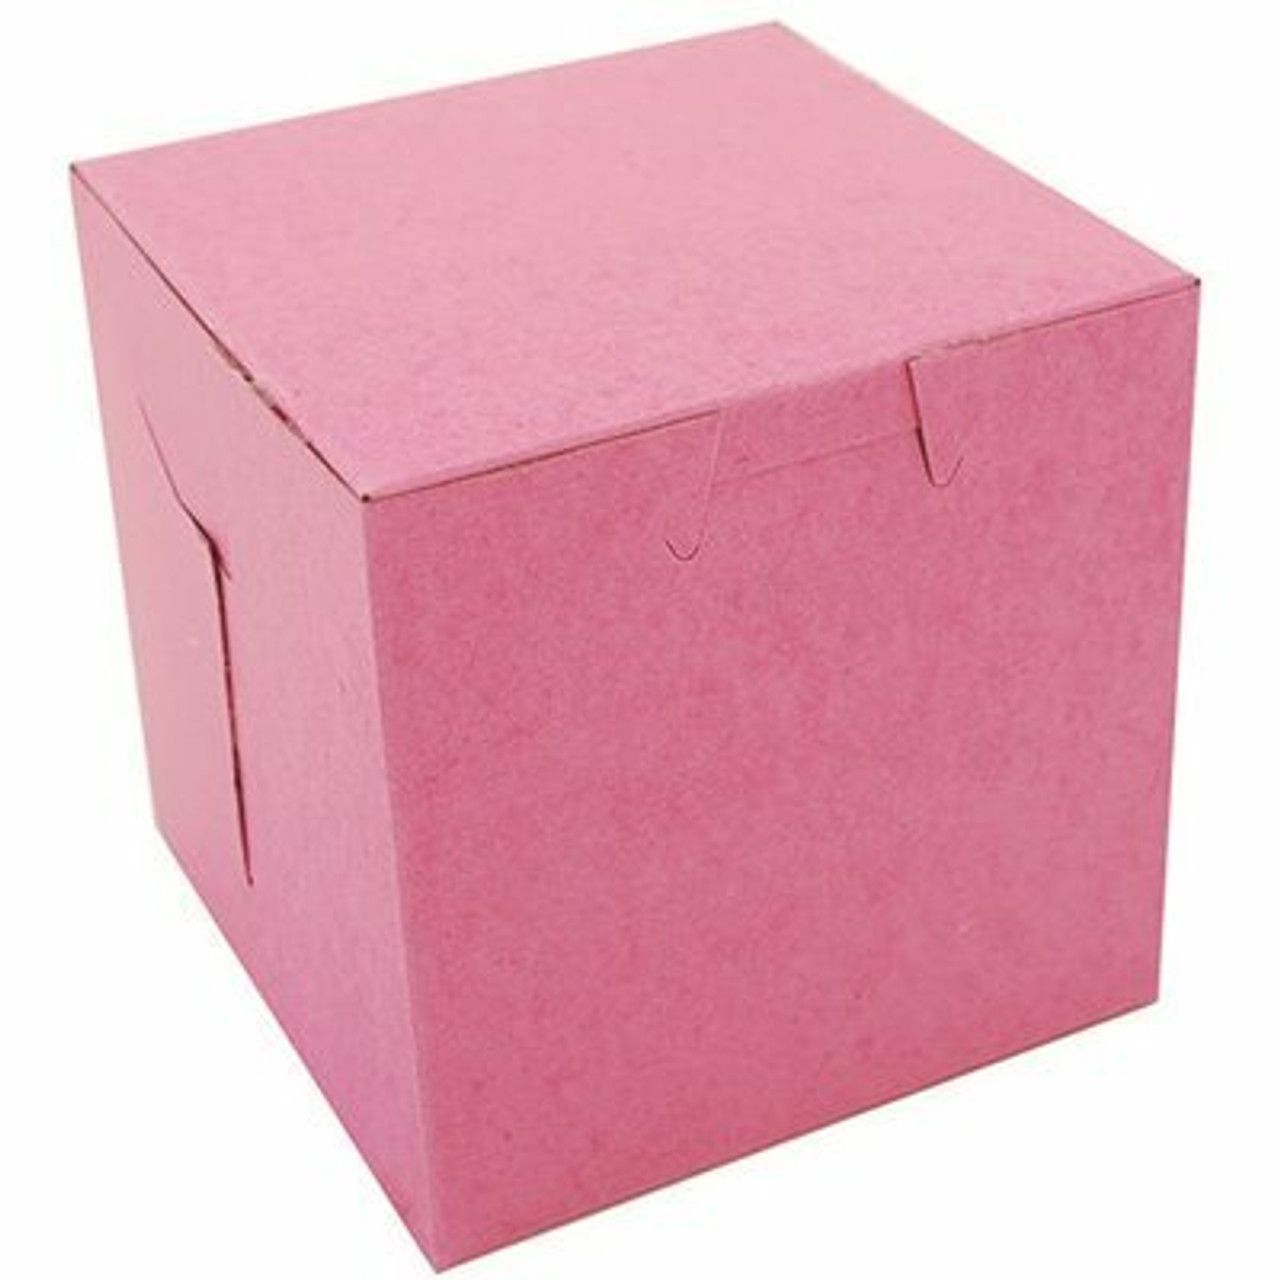 Southern Champion Tray Pink Non-Window Bakery Box W/Tuck-In Lid 4 X 4 X 4" (200 Per Case)